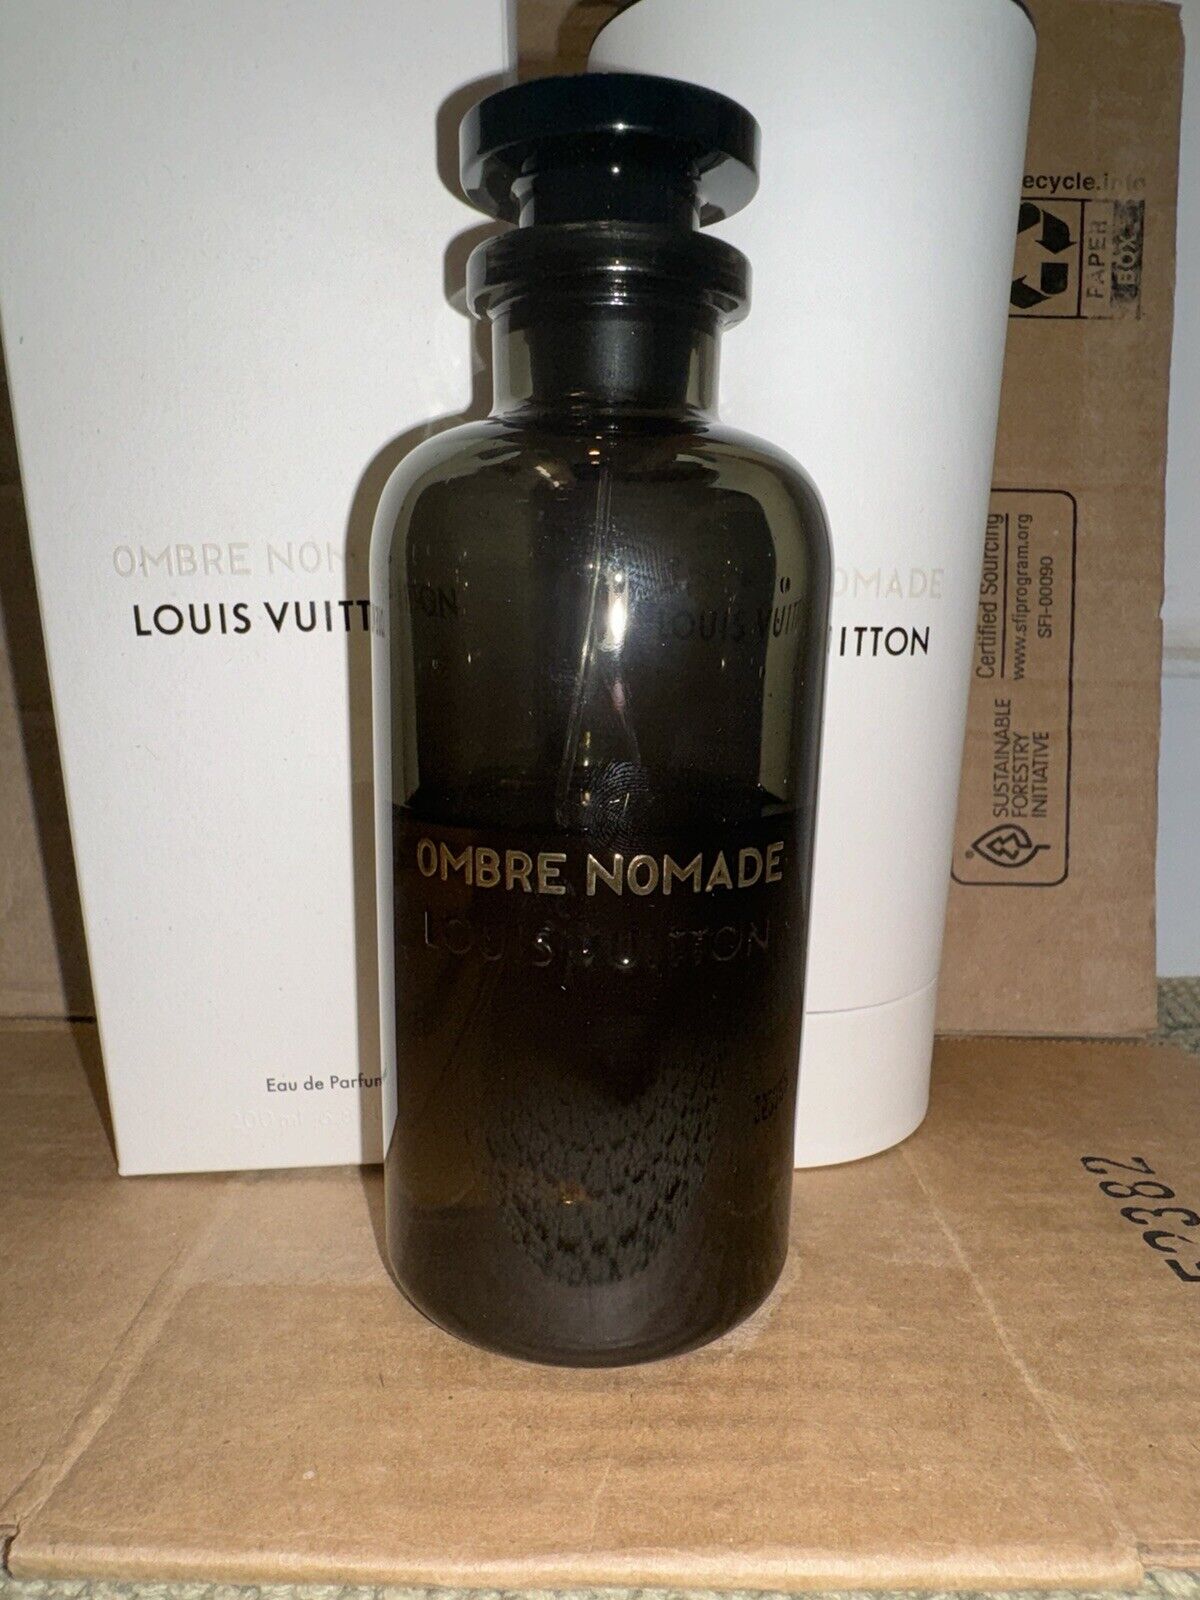 *USED* LOUIS VUITTON OMBRE NOMADE UNISEX 6.8oz / 200ml